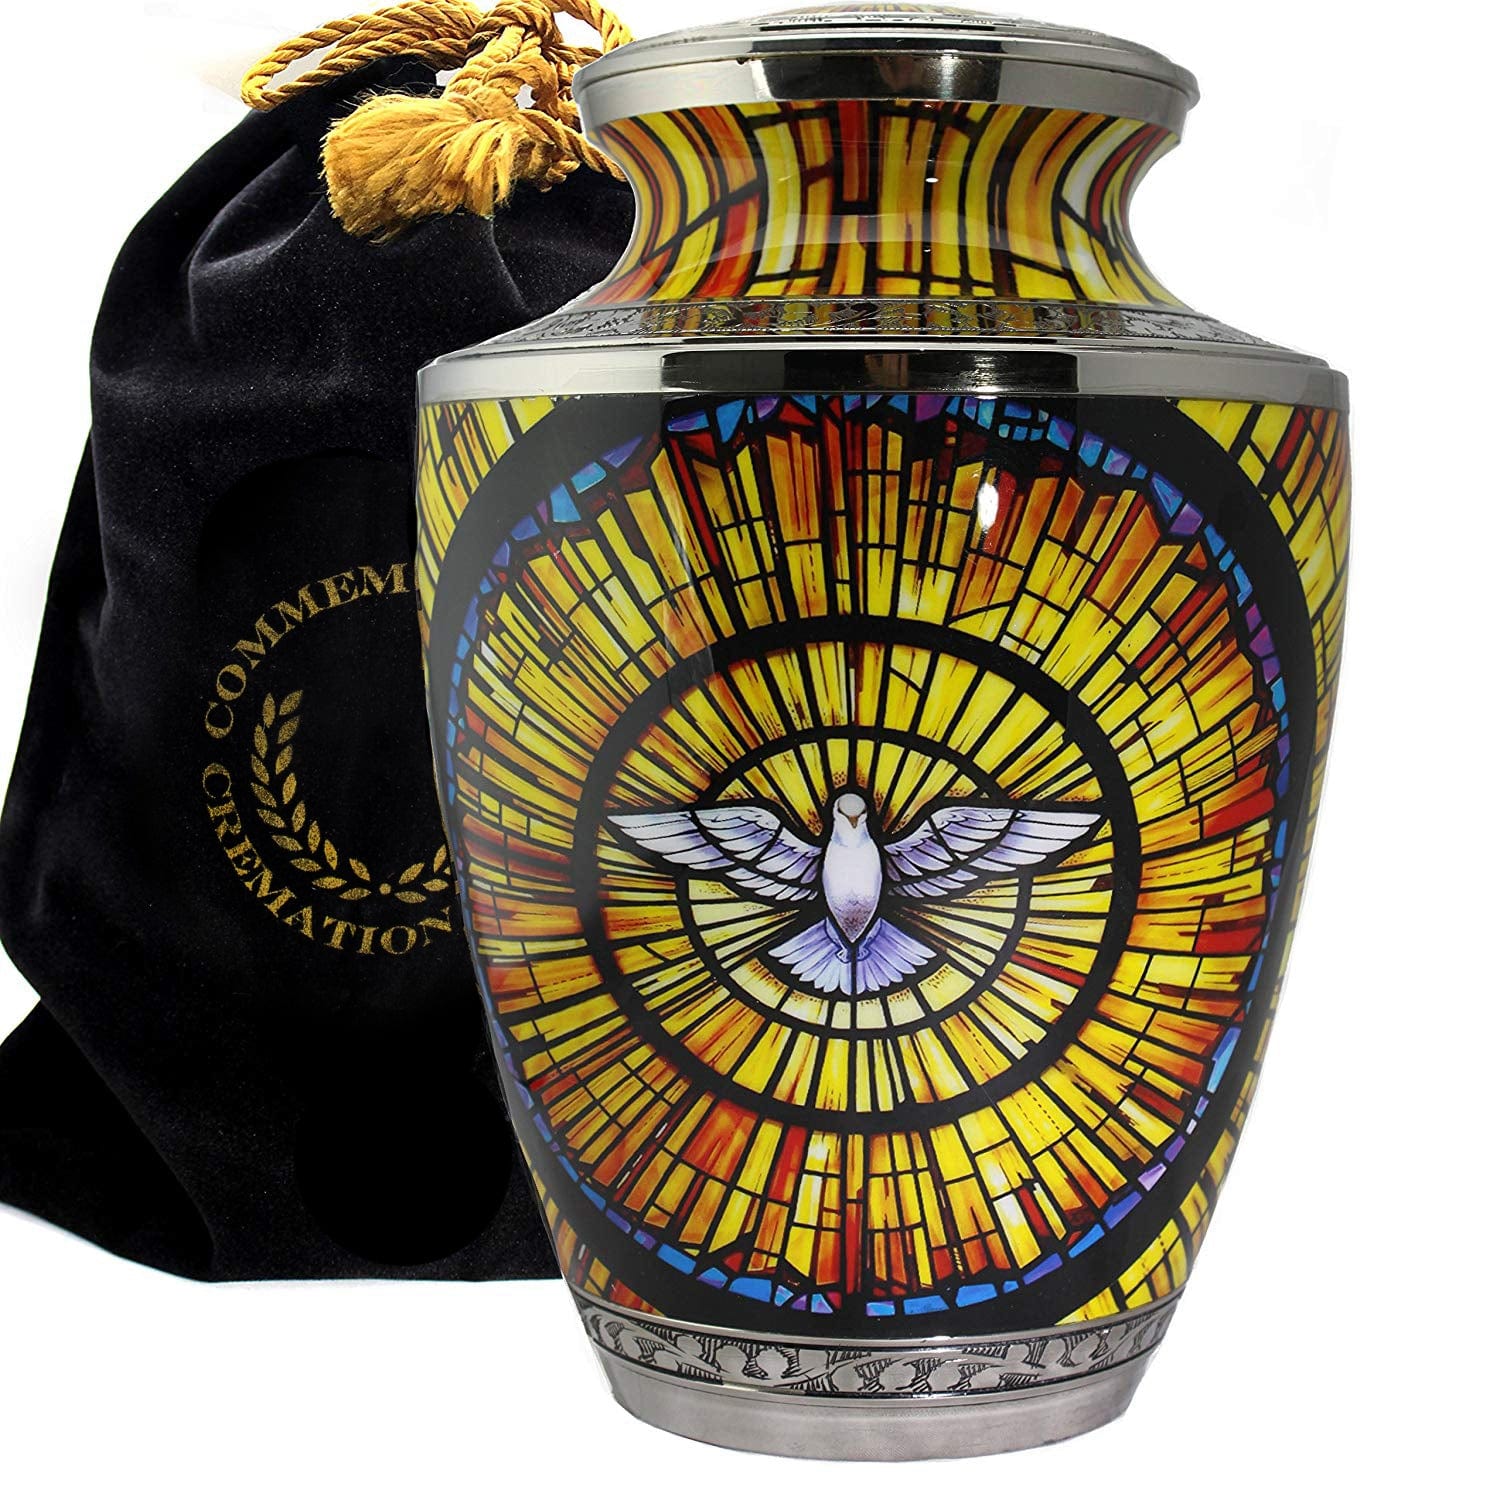 Commemorative Cremation Urns Home & Garden Holy Dove Cremation Urn